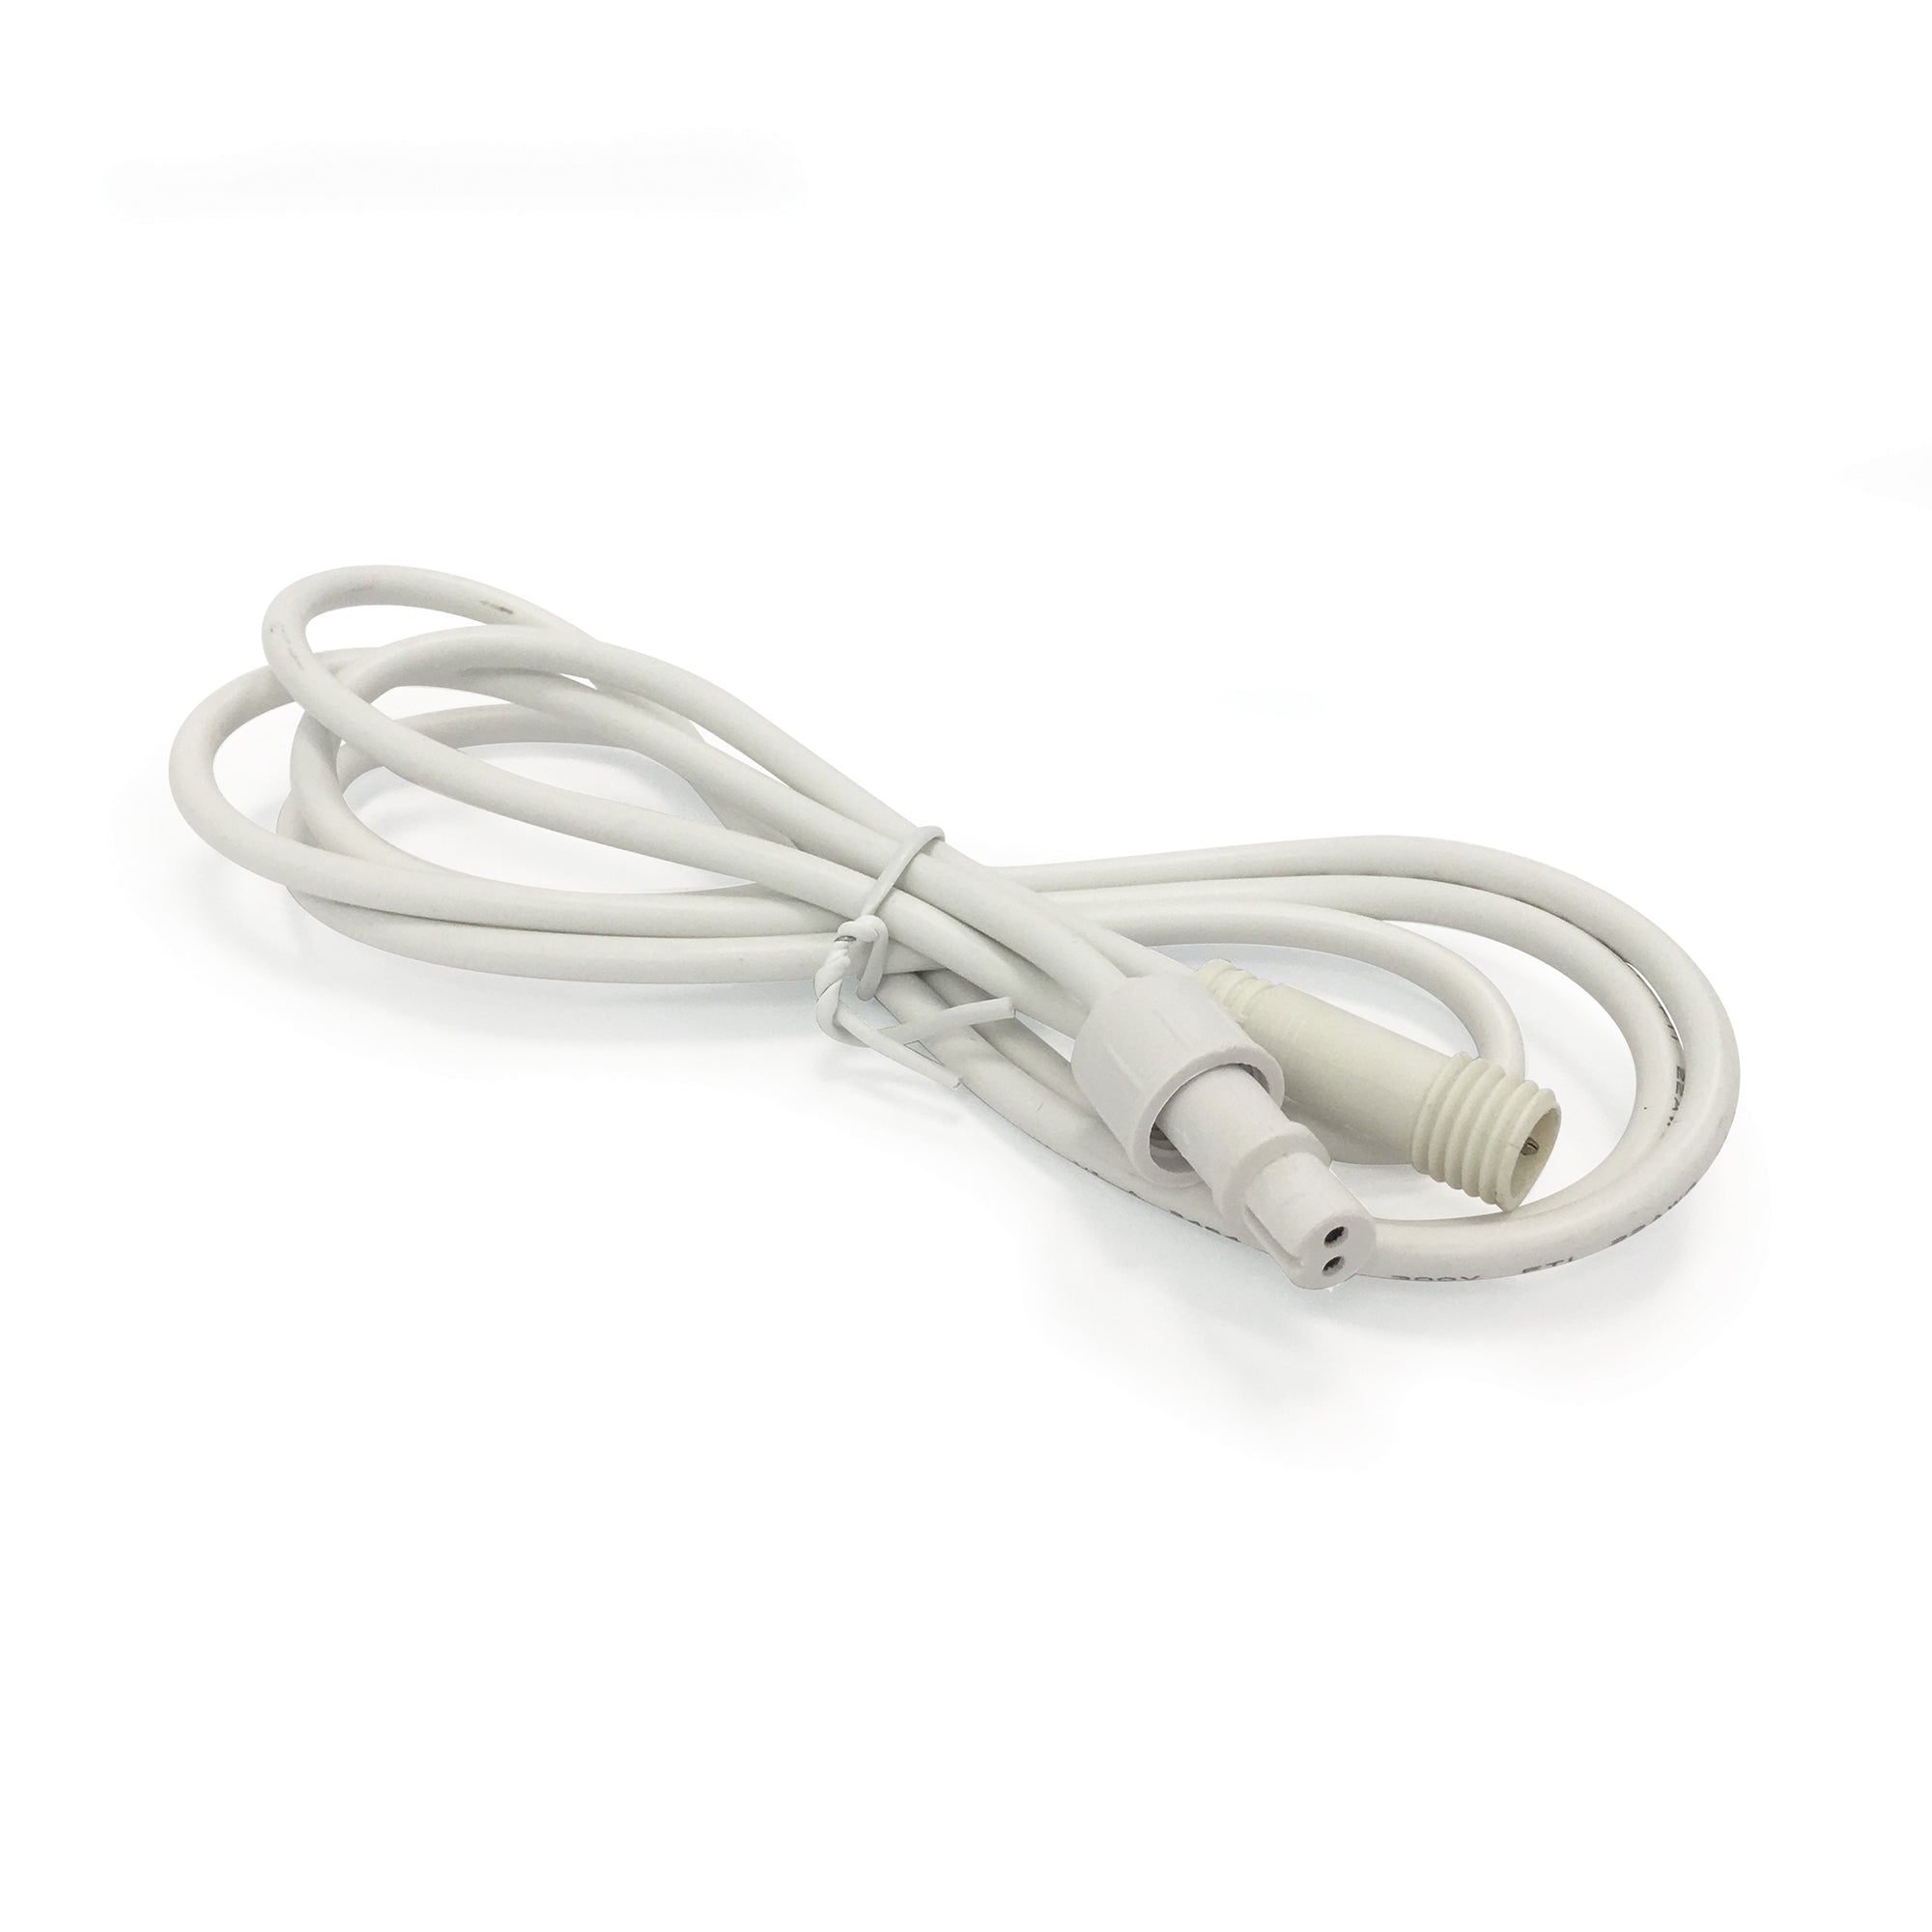 Nora Lighting NMA-EW-4 - Recessed - 4' Quick Connect Linkable Extension Cable for M1+ and M2 Trimless luminaires